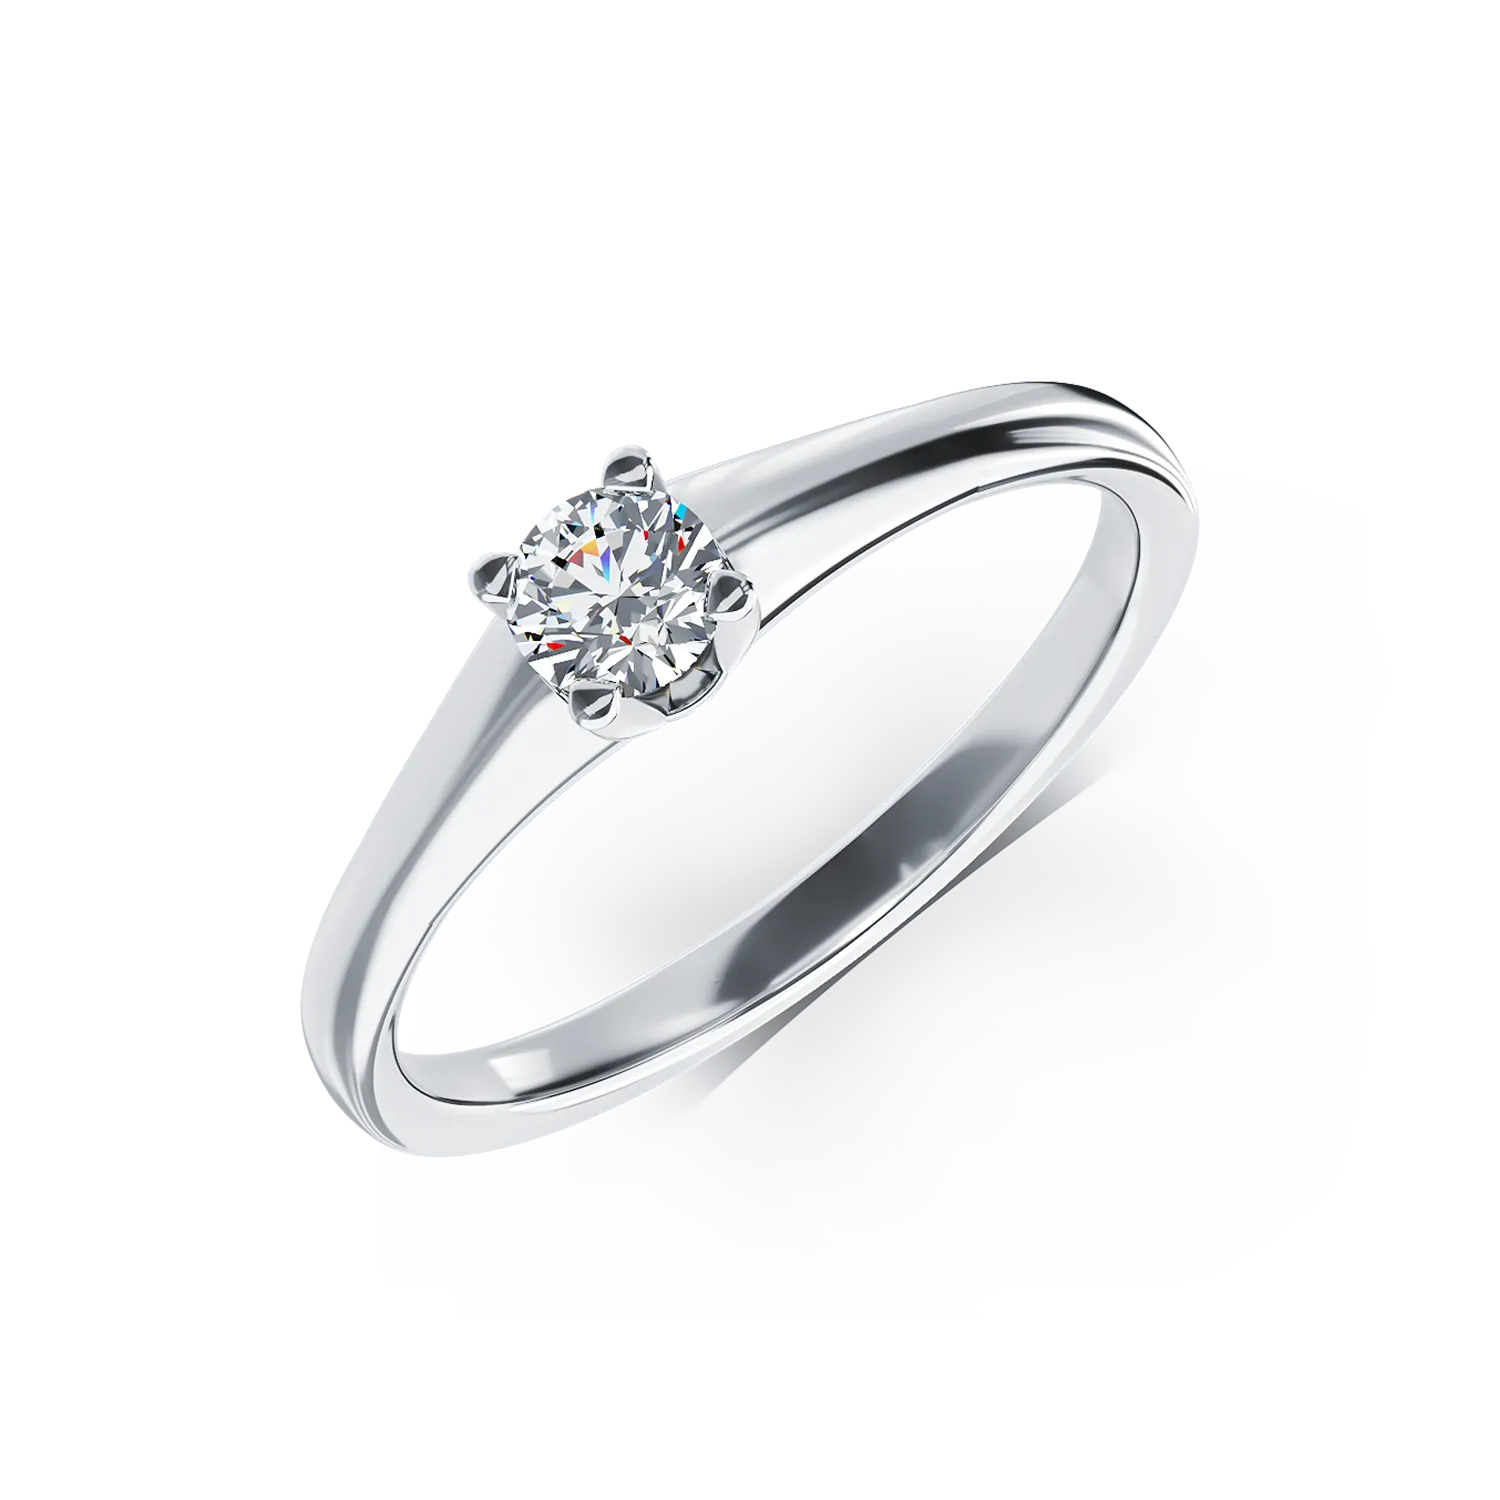 18K white gold engagement ring with a 0.15ct solitaire diamond